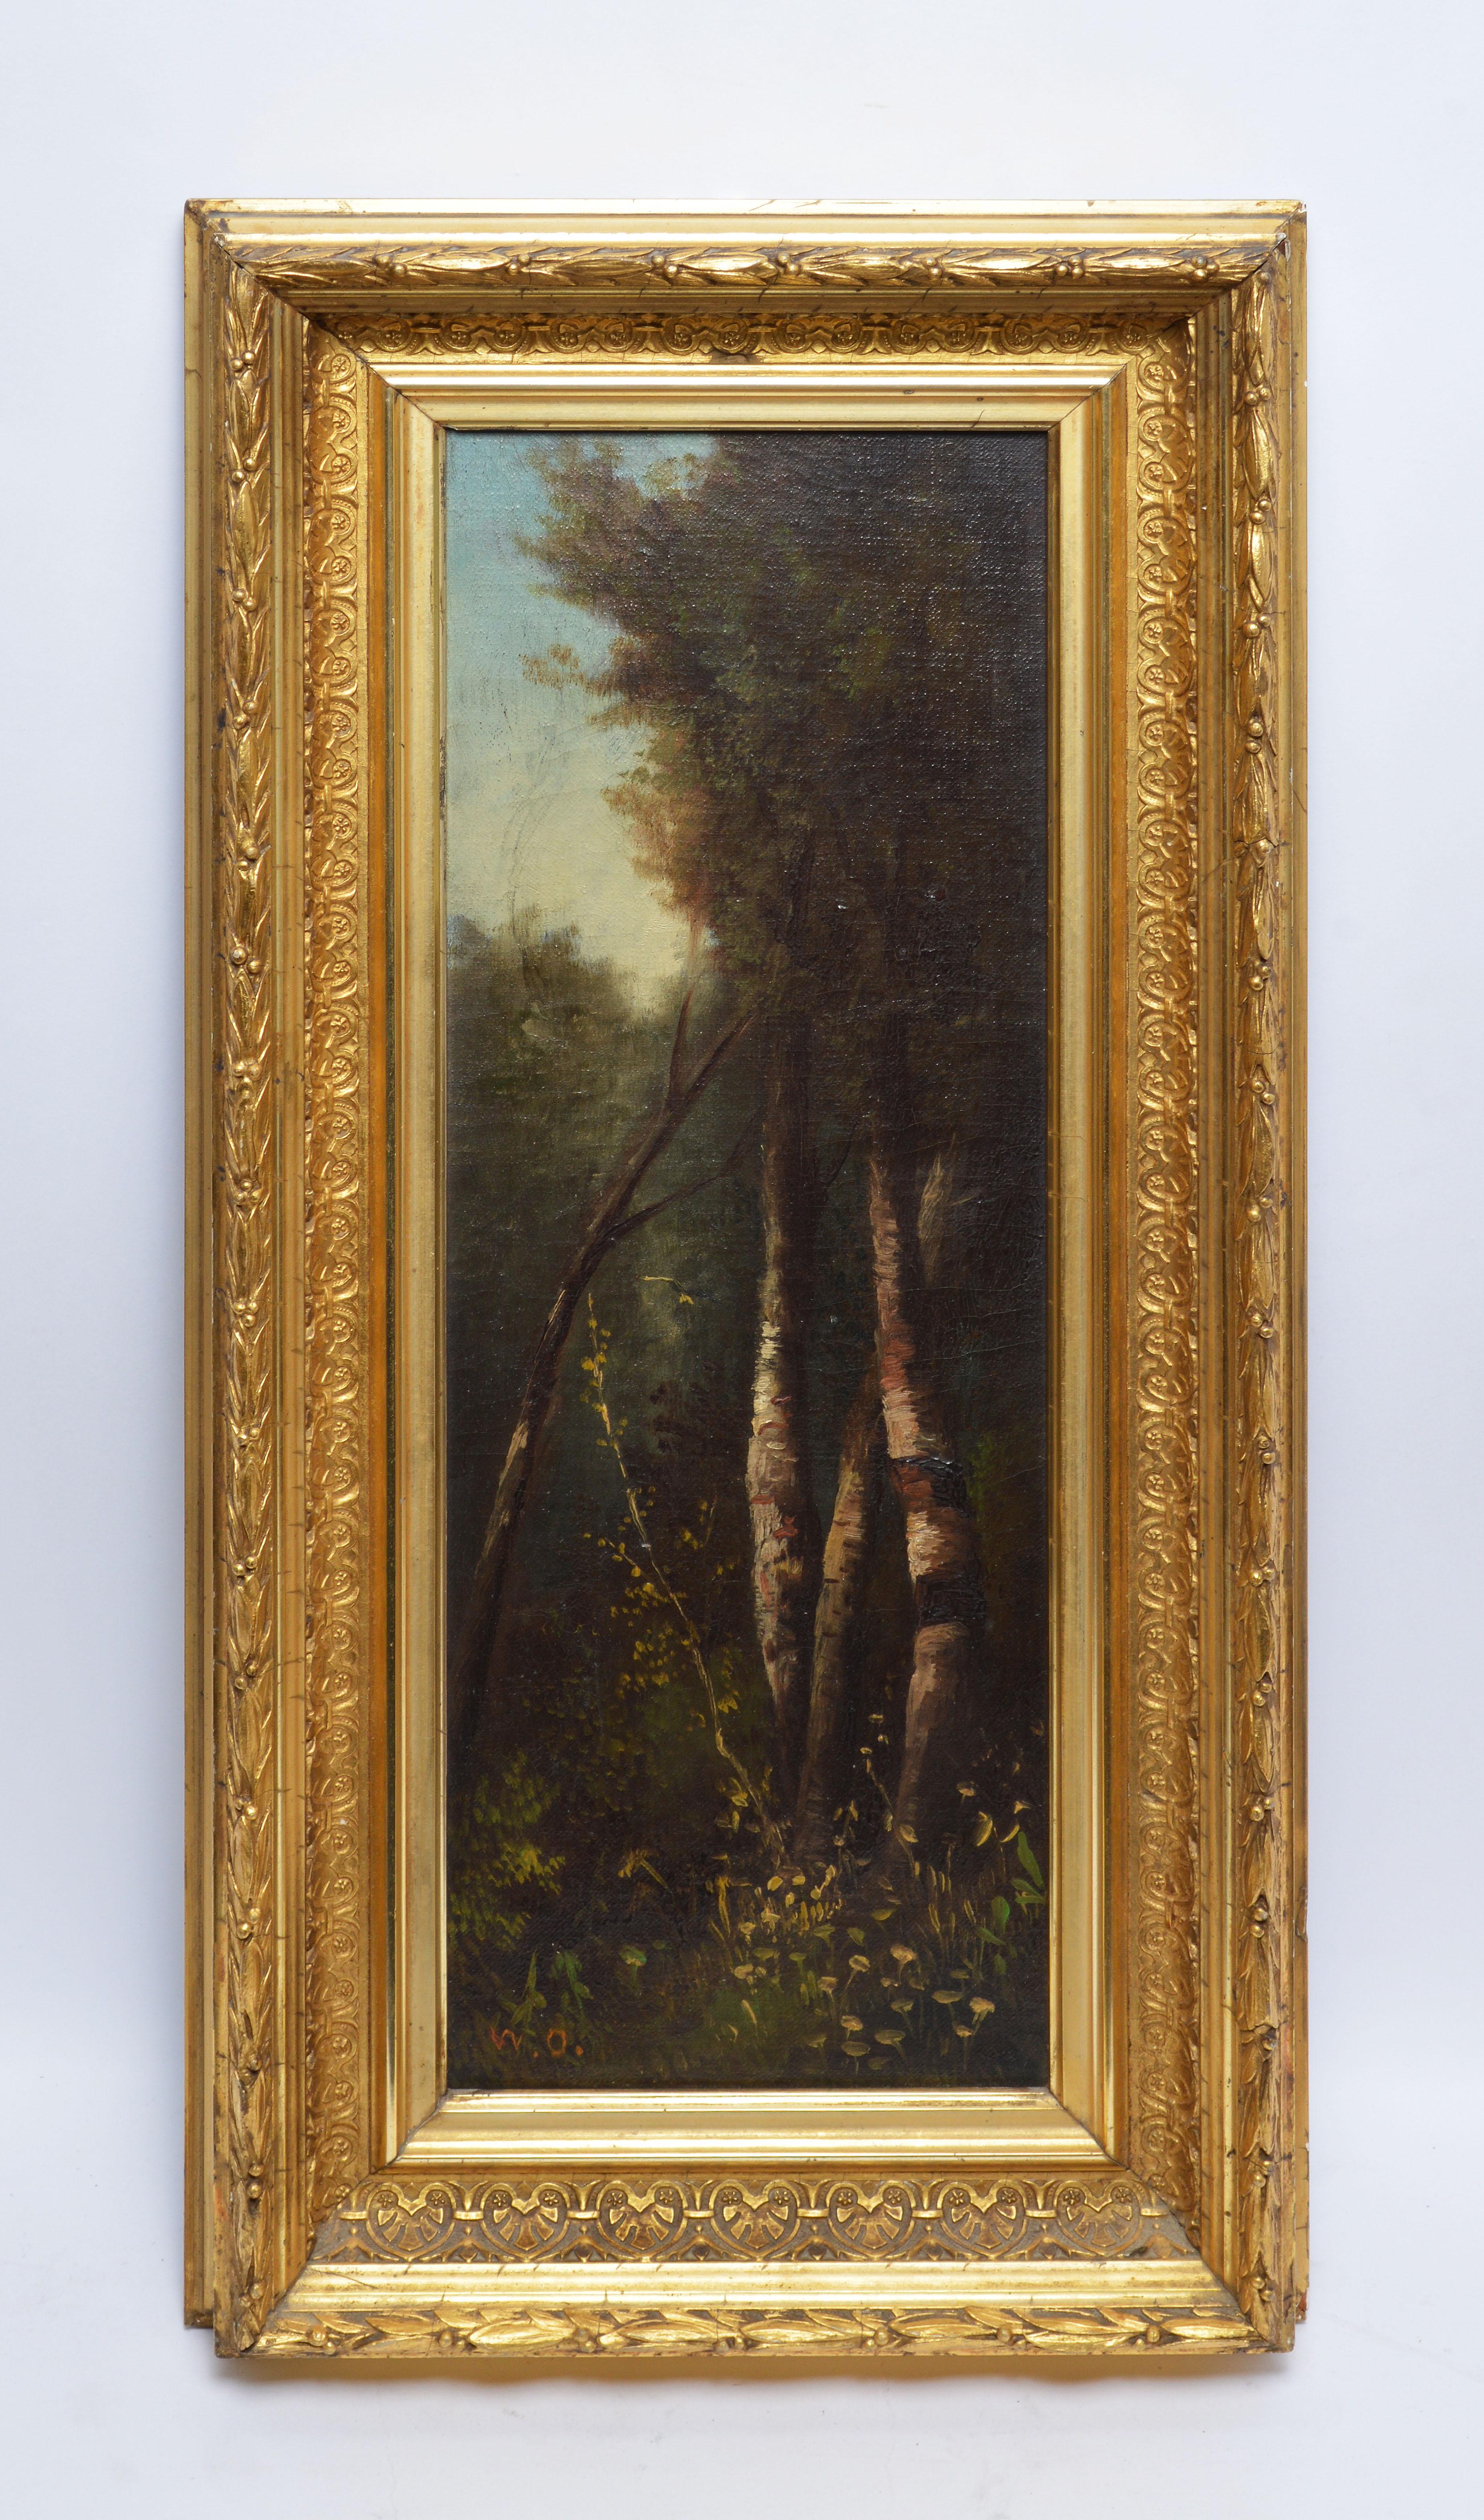 Antique American Hudson River School painting of a forest landcape by William Ongley  (1836 - 1890).  Oil on canvas, circa 1870. Signed in monogram.  Displayed in a period giltwood frame.  Image, 6"L x 18"H, overall 11"L x 23"H.